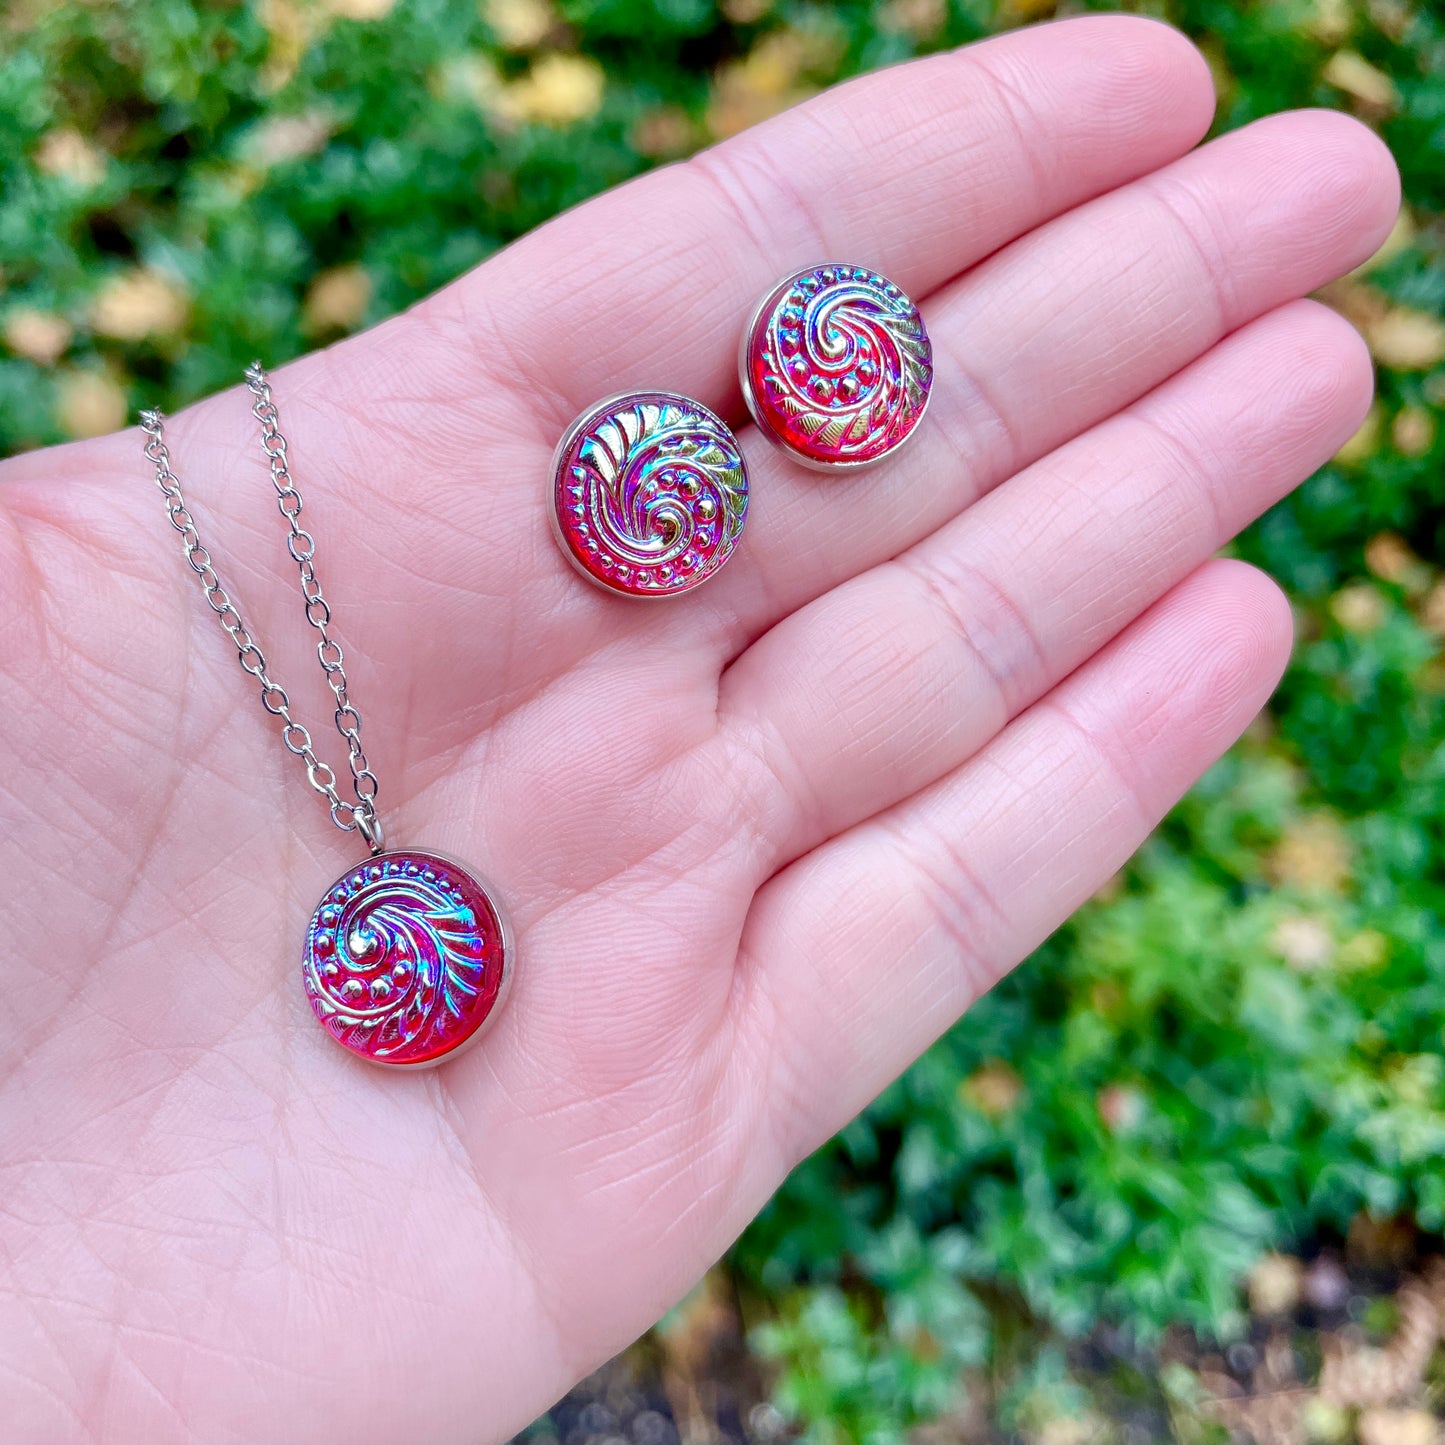 Red Glass with Iridescent Ocean Swirl Czech Glass Button Necklace and Earrings Gift Set